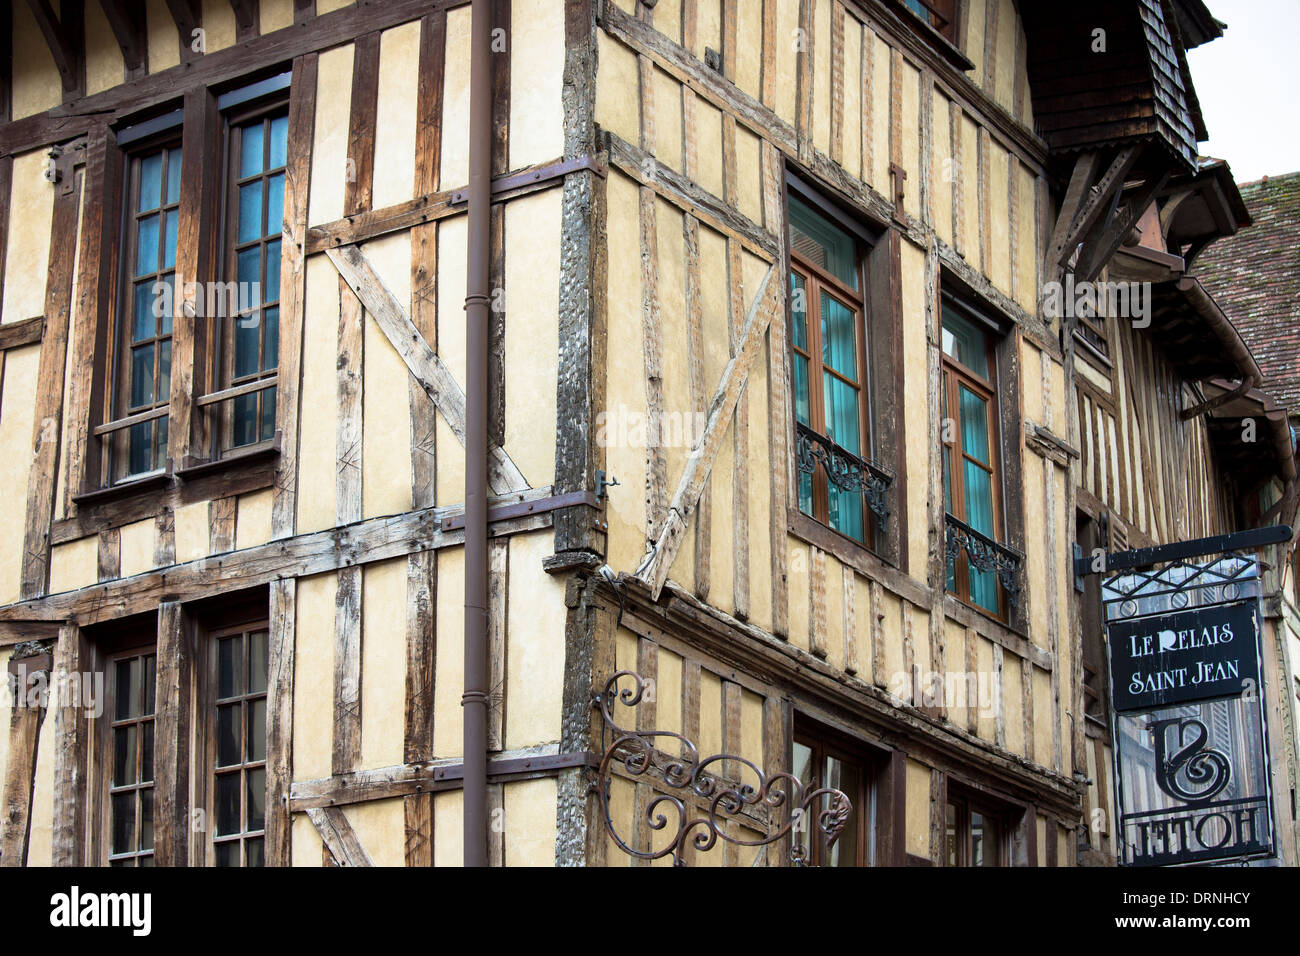 Traditional medieval timber-frame architecture of Le Relais Saint Jean Hotel  in Troyes in the Champagne-Ardenne region of France Stock Photo - Alamy